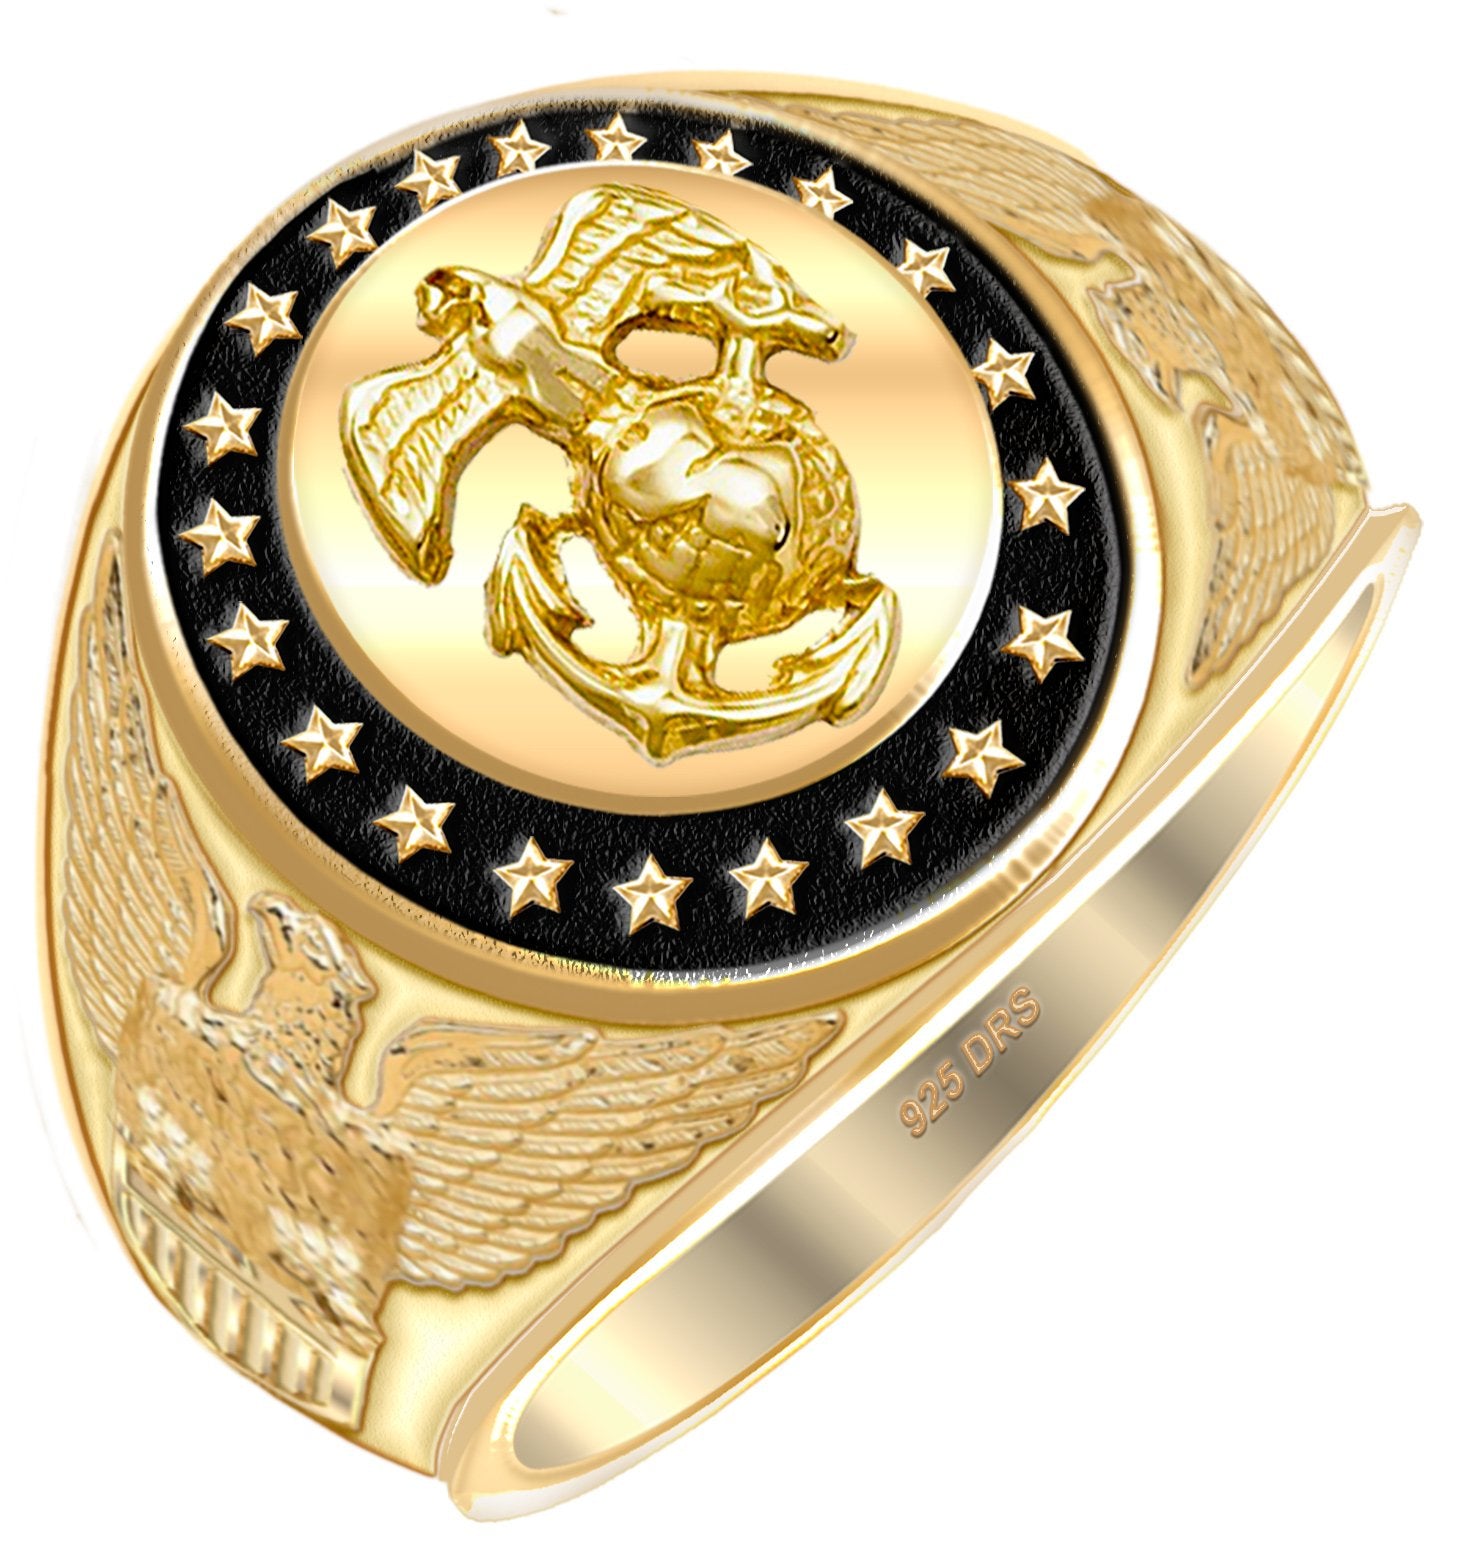 0.925 Sterling Vermeil US Marine Corps Solid Ring